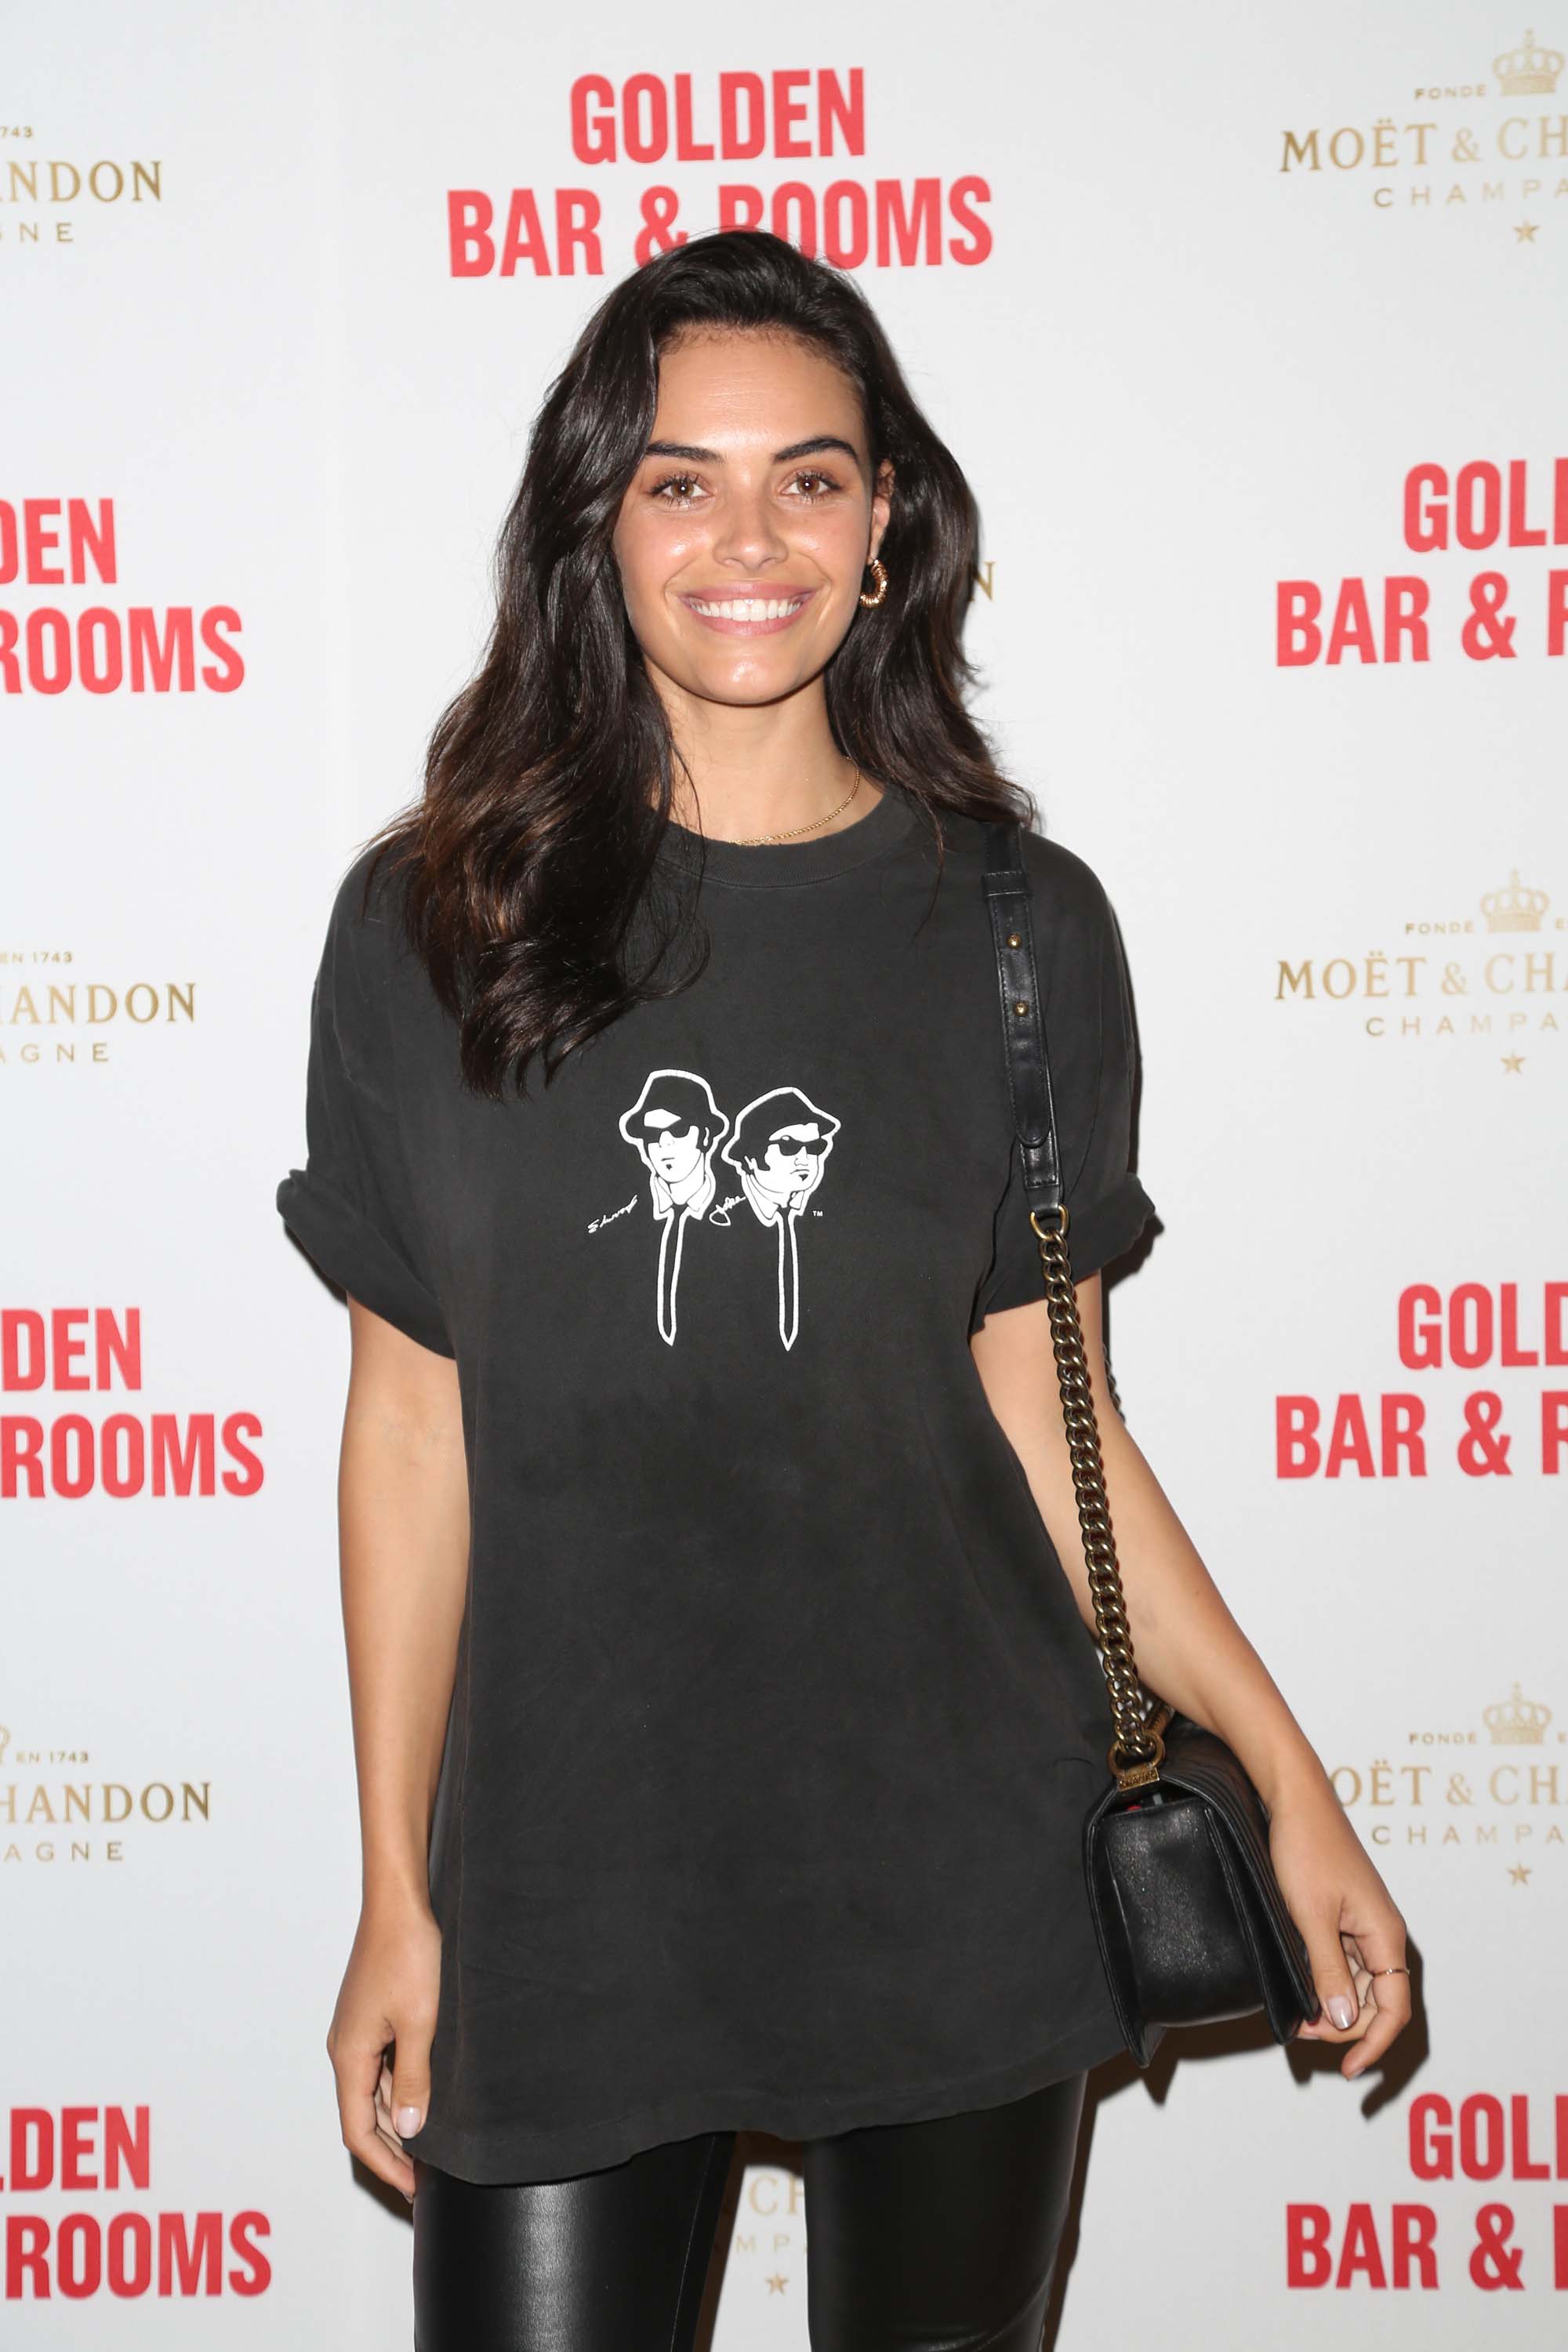 Monika Clarke attends Double Bay institution launching The Golden Bar & Rooms